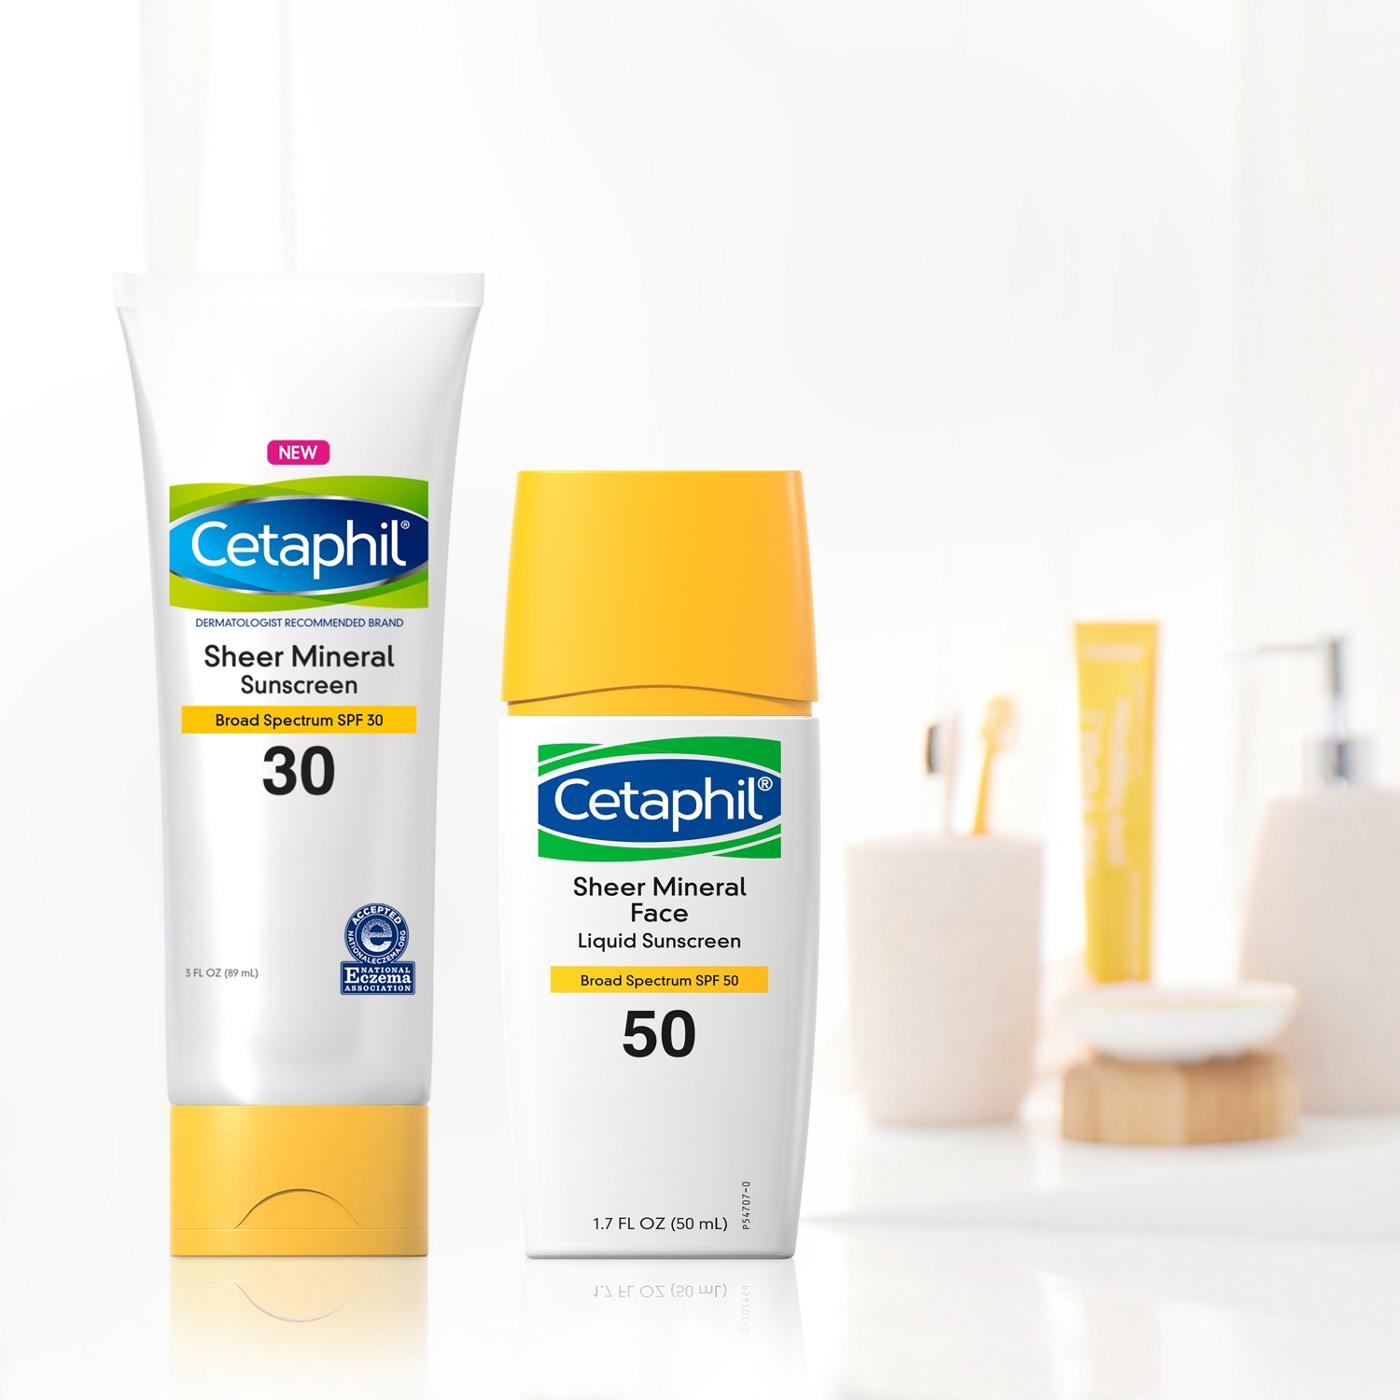 Cetaphil Sheer Mineral Sunscreen SPF 30; image 7 of 9